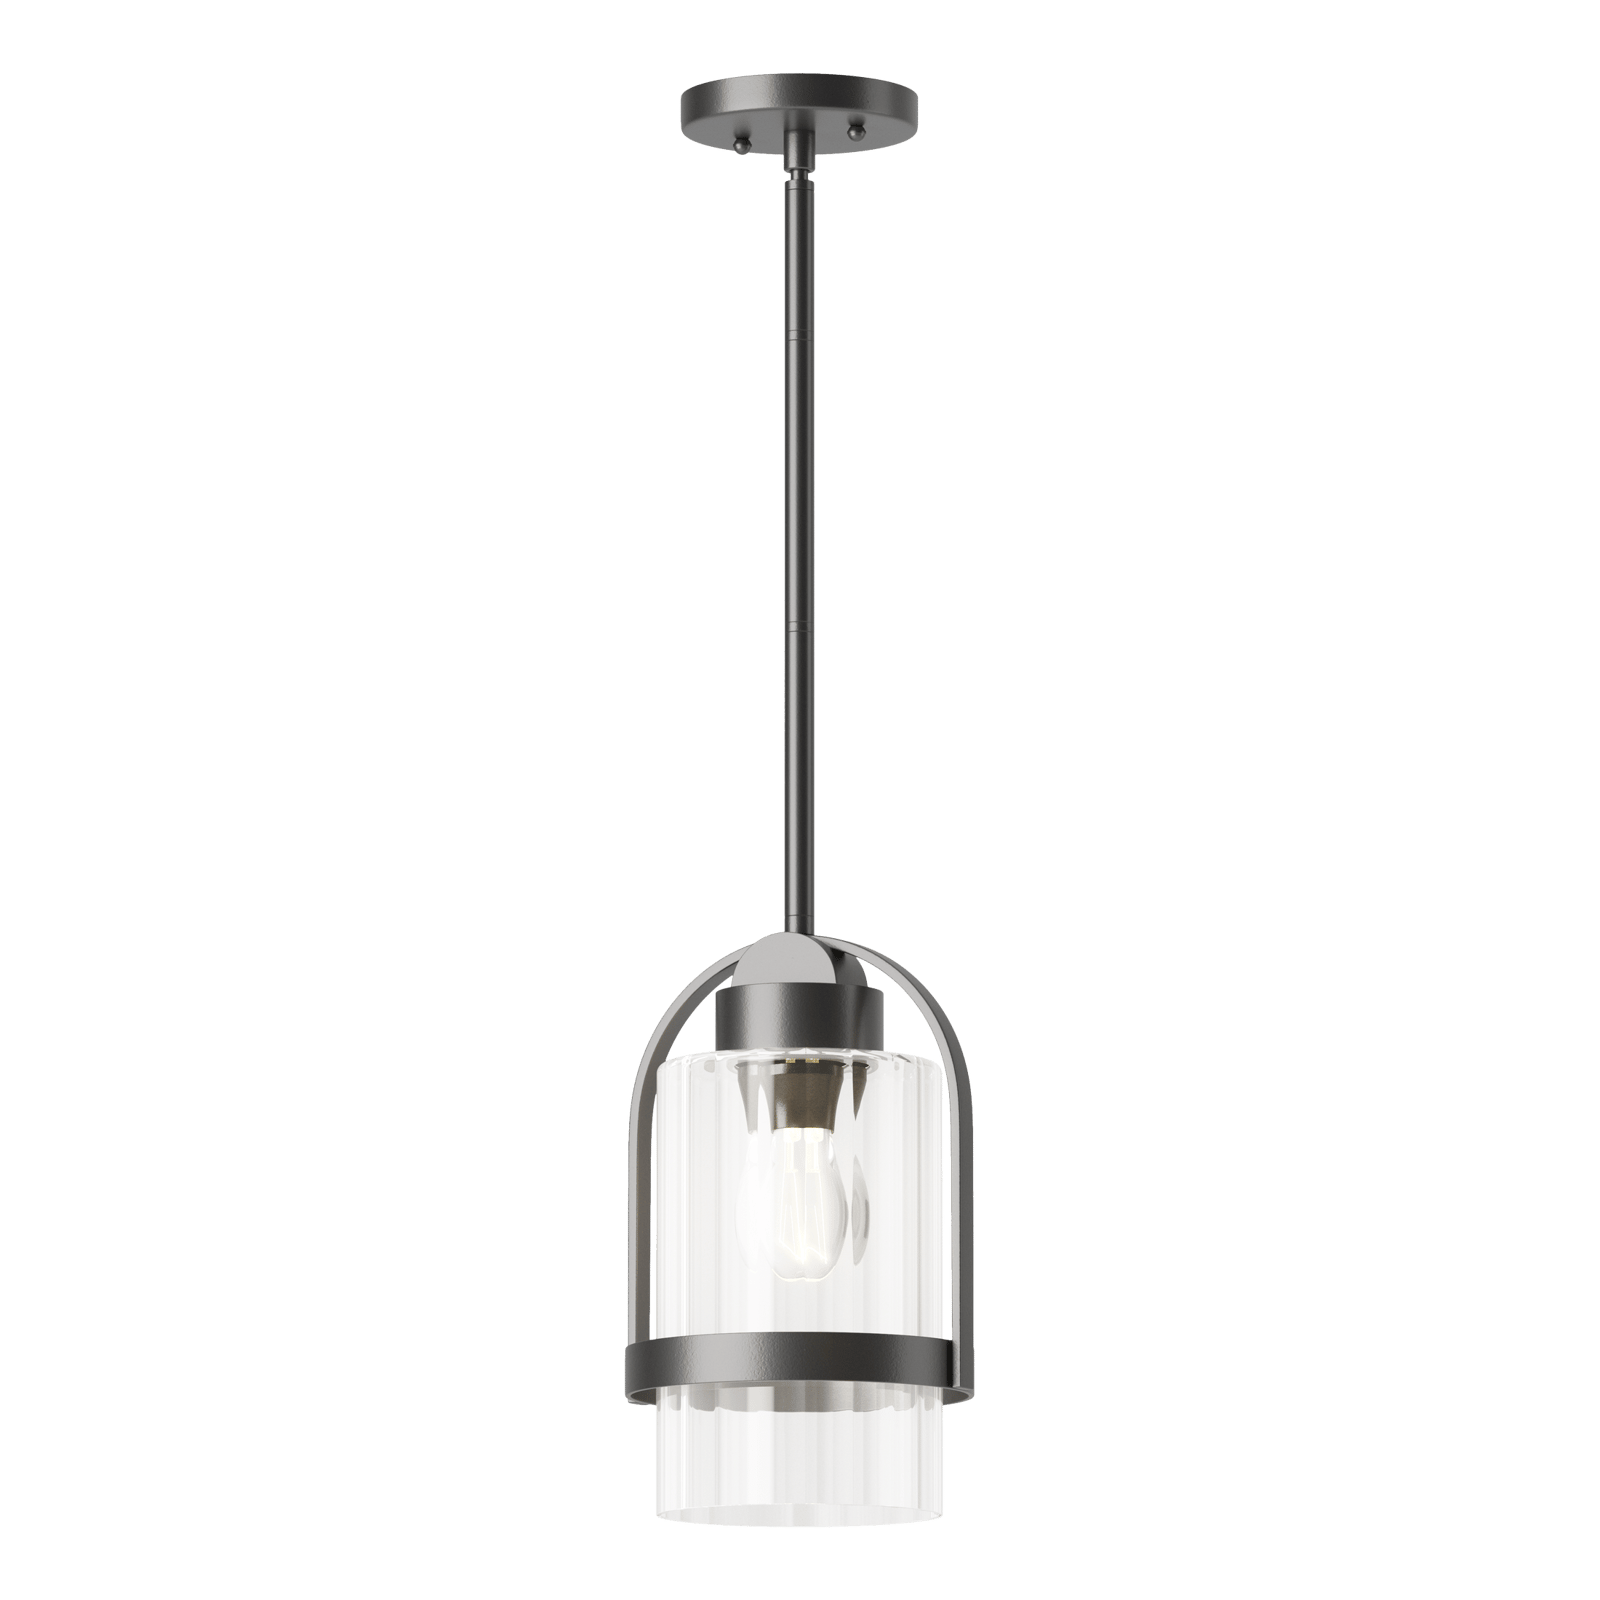 Hubbardton Forge Alcove Outdoor Pendant Outdoor Light Fixture l Hanging Hubbardton Forge Coastal Black Clear Glass (ZM) 